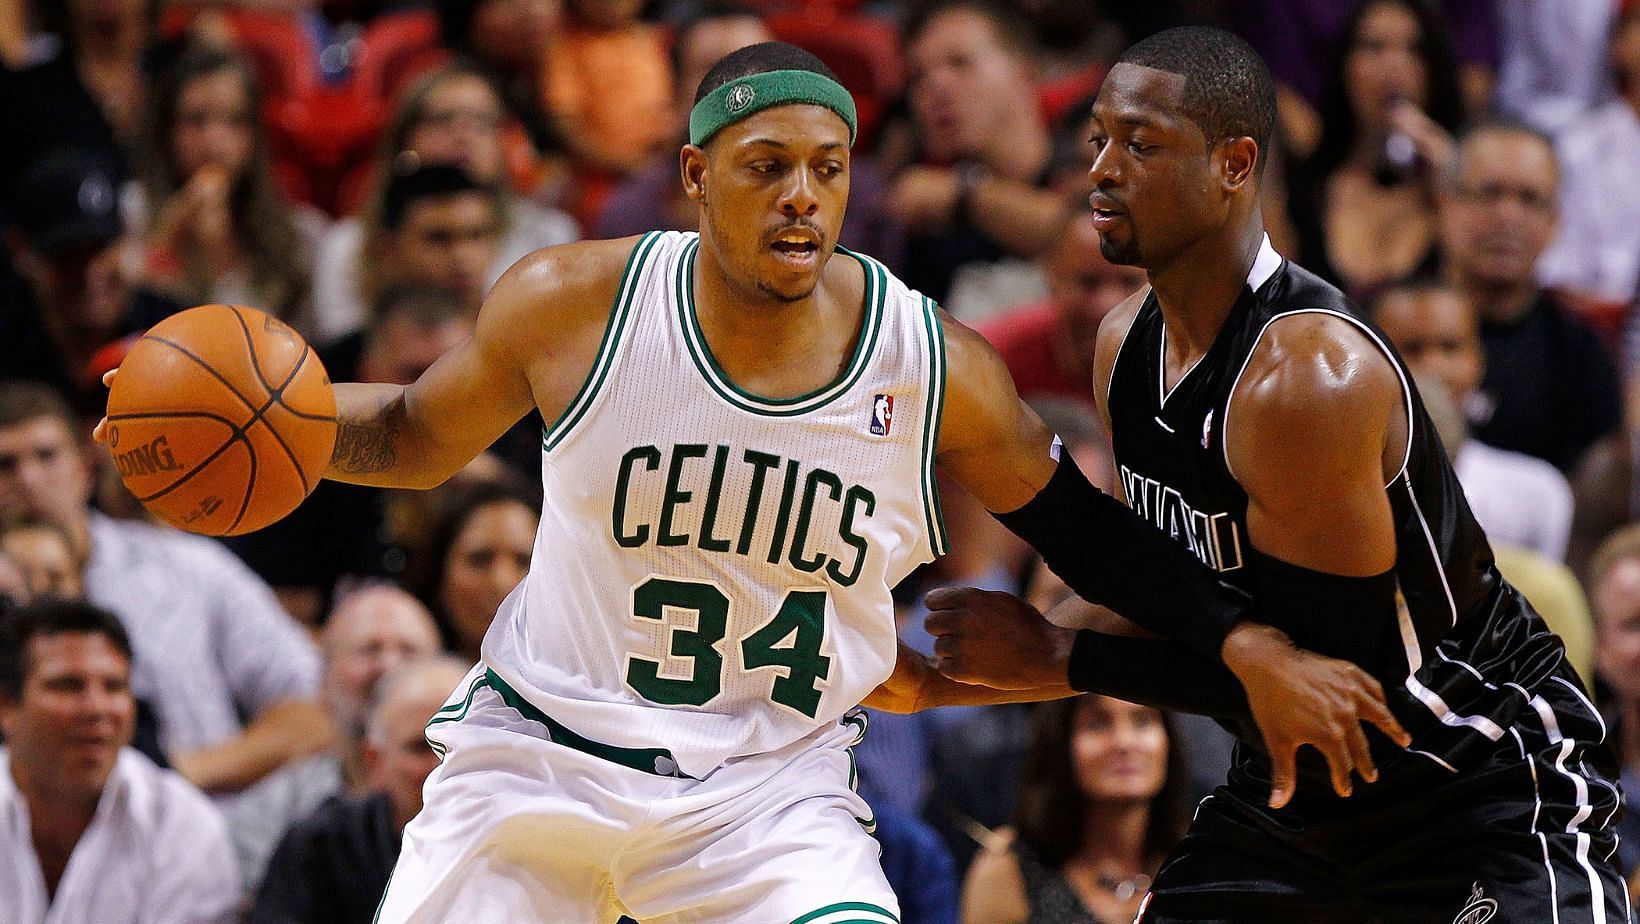 Paul Pierce has been insisting that he is the better player than Dwyane Wade.